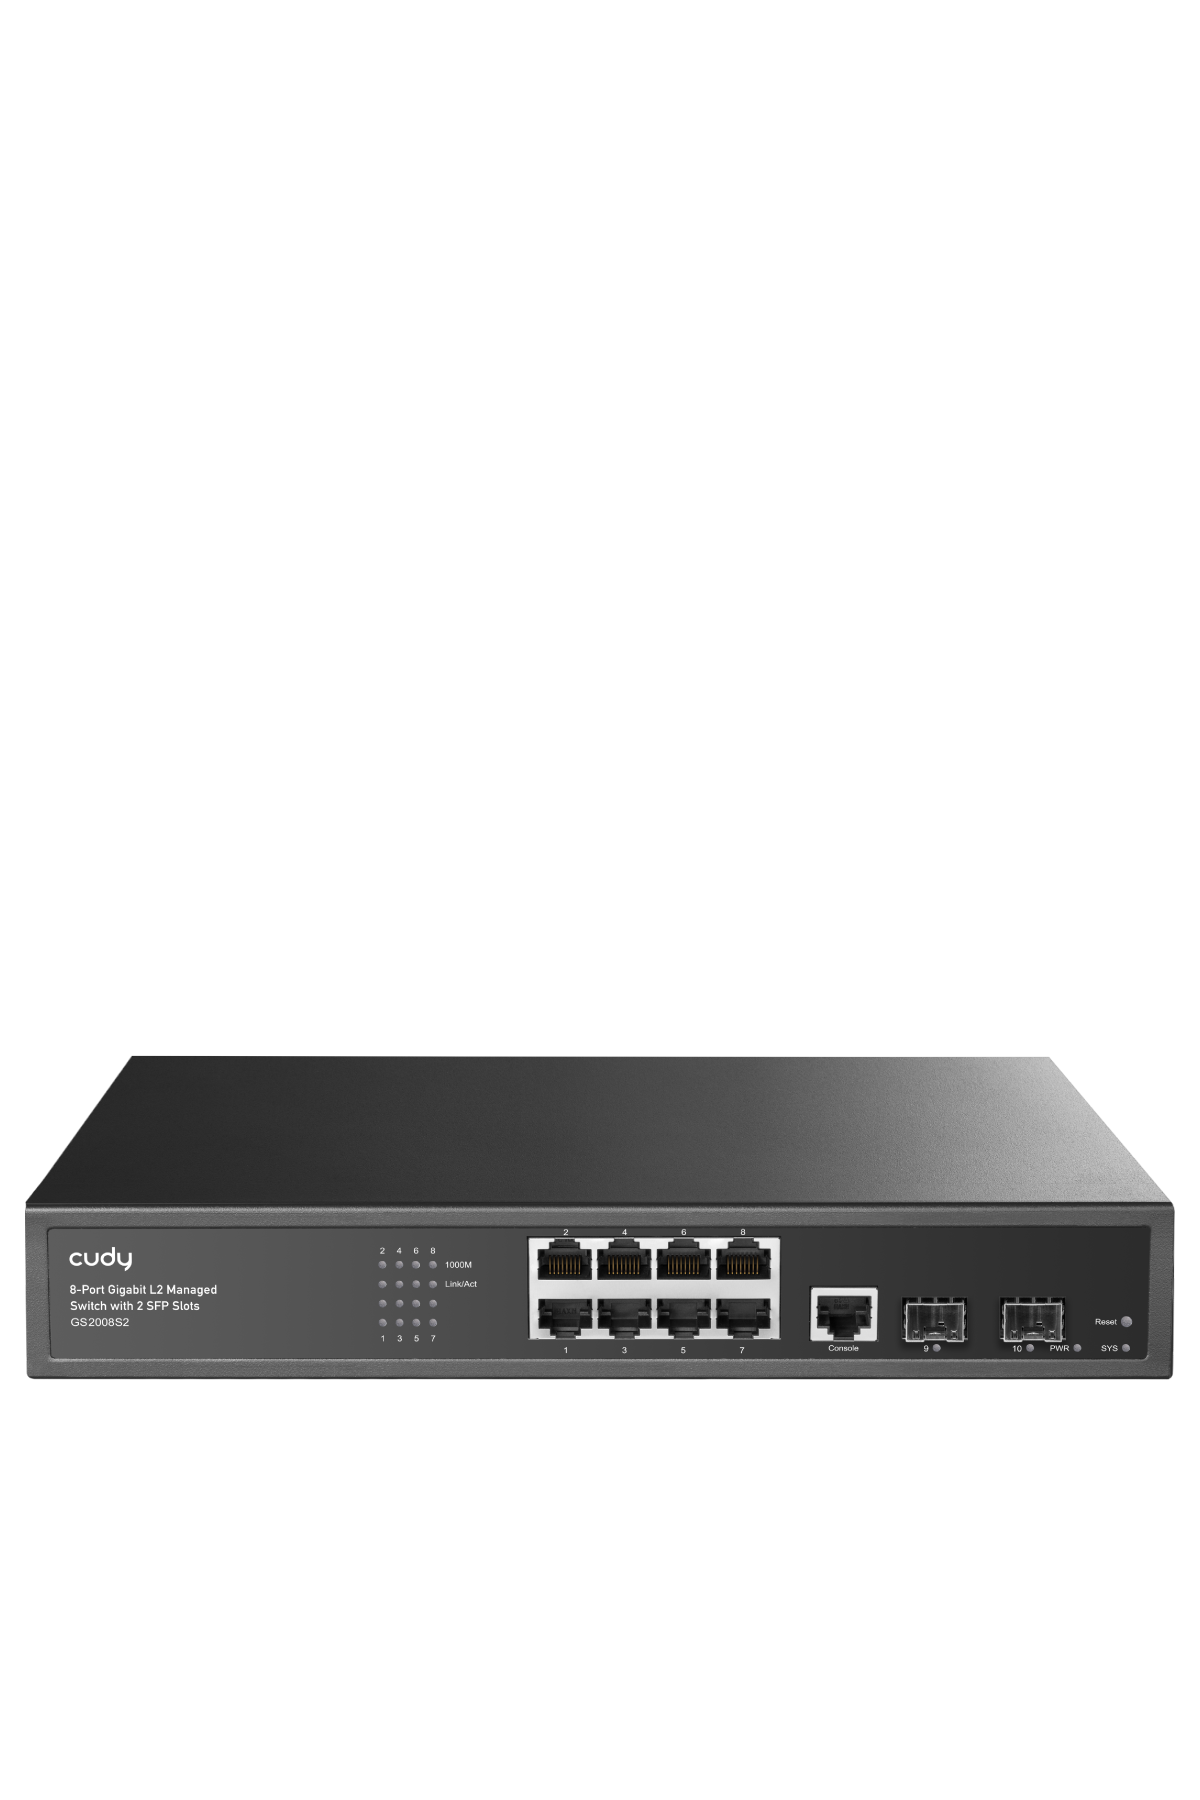 8-Gigabit Port L2 Managed Switch with 2 SFP Slots, Model: GS2008S2